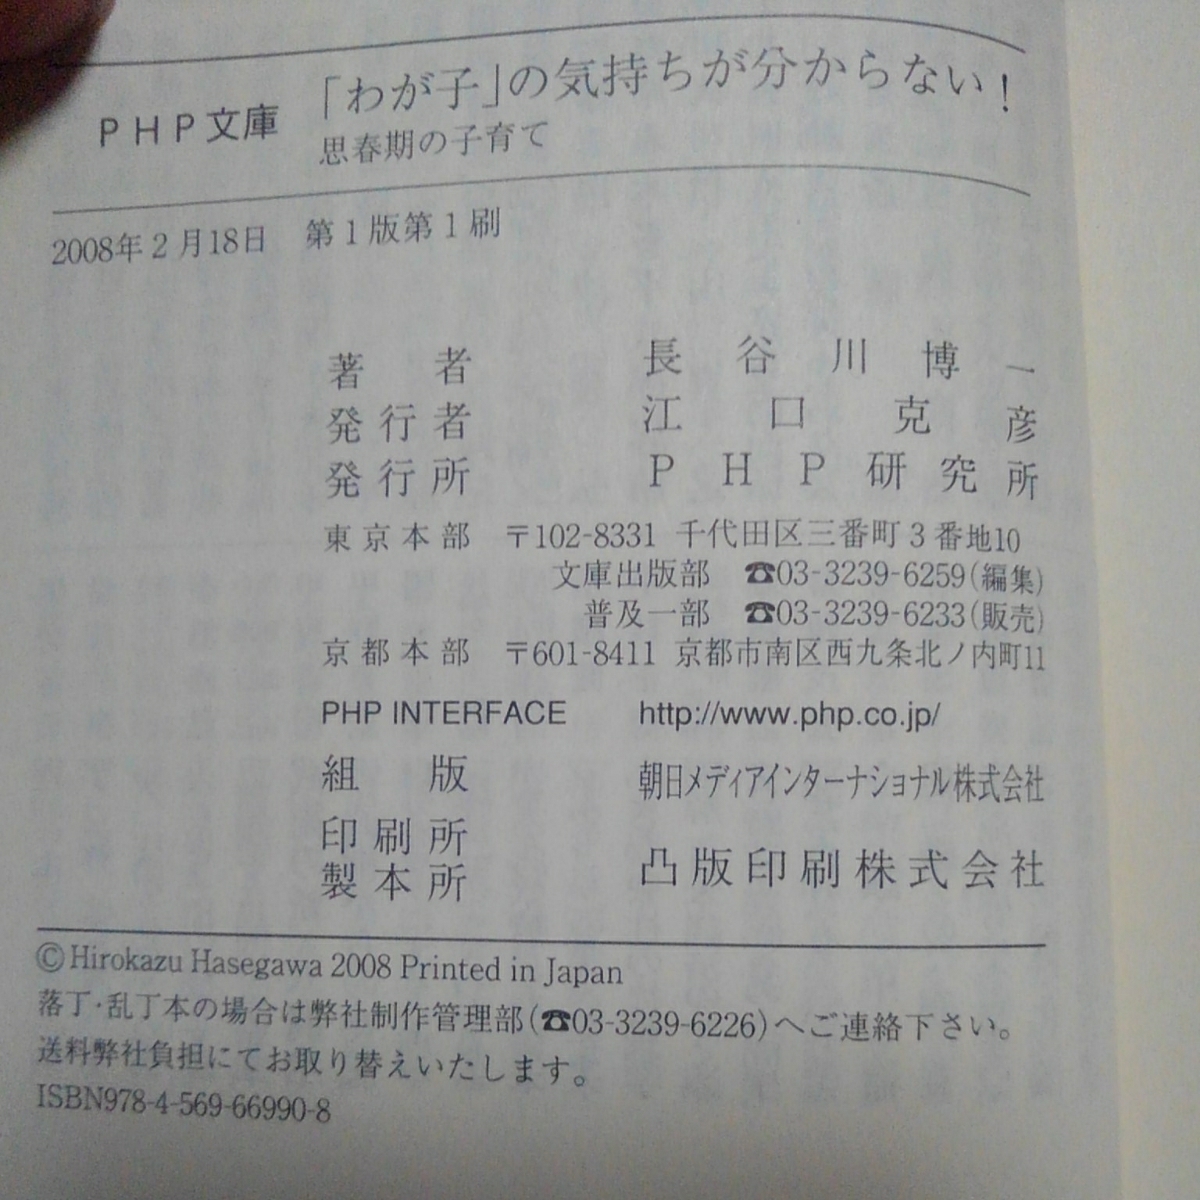 [...]. feeling . minute from not!. spring period. child rearing Hasegawa . one PHP library 